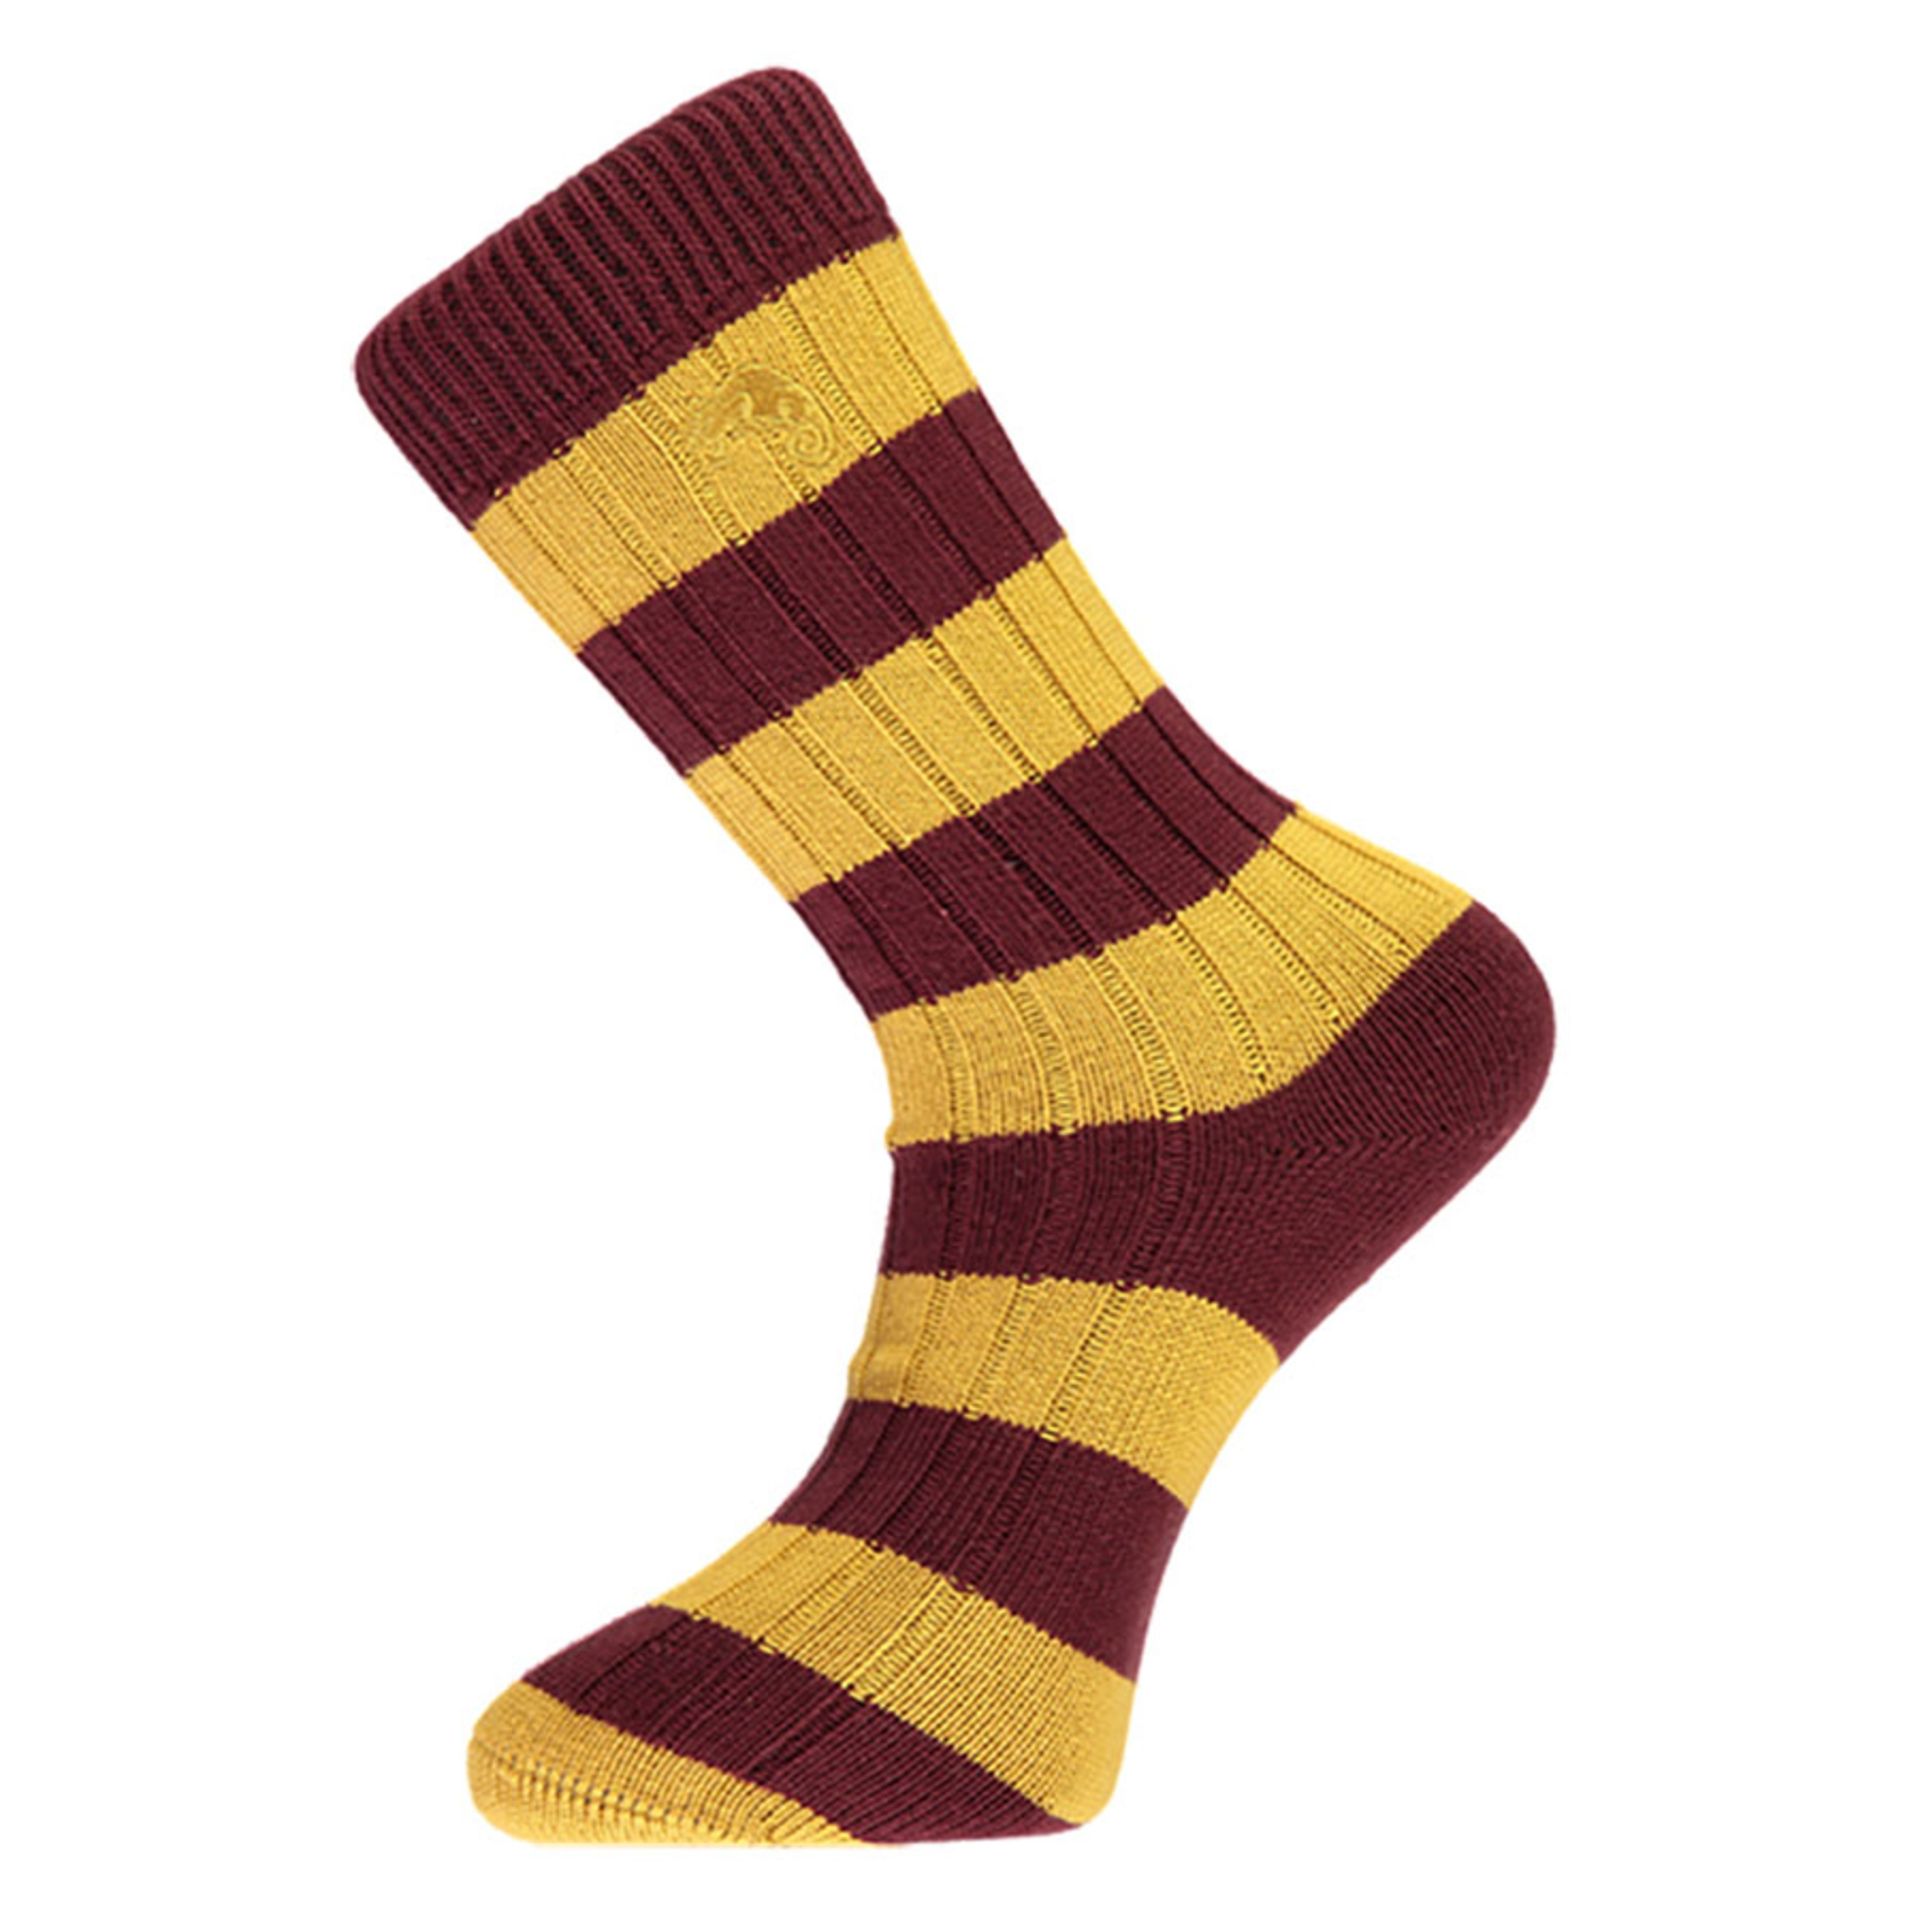 Approximately 5930 Pairs of Gents Socks, majority 94% cotton, sizes 3 ½ - 6 ½ & 7 – 11, various - Image 17 of 46